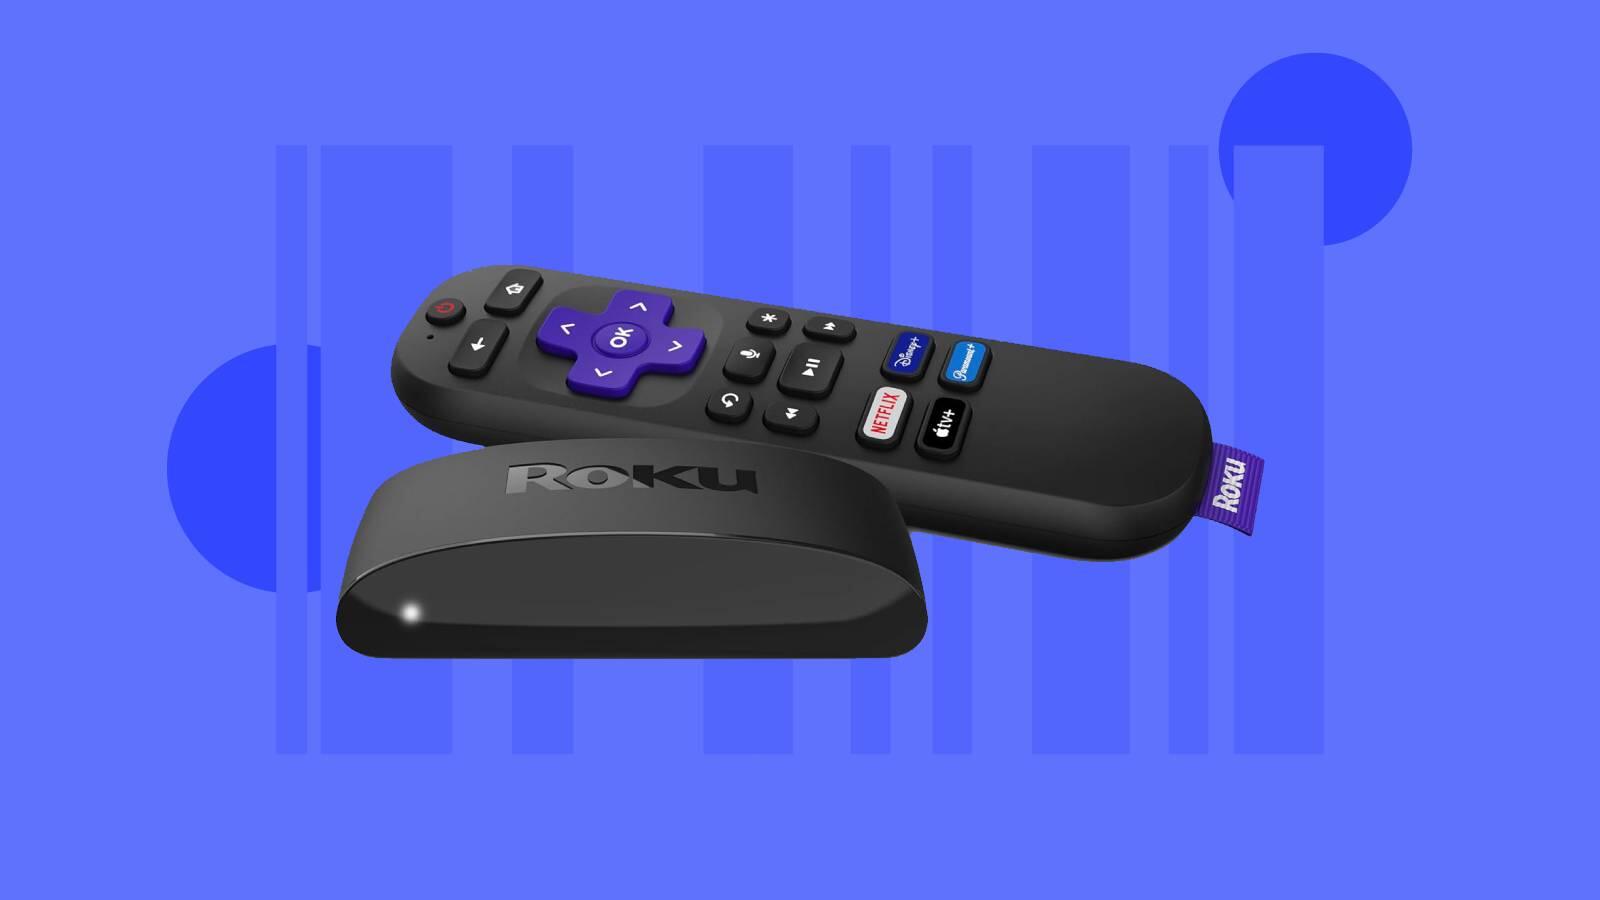 The Roku Express 4K Plus, Our Favorite 4K Streaming Device, Is